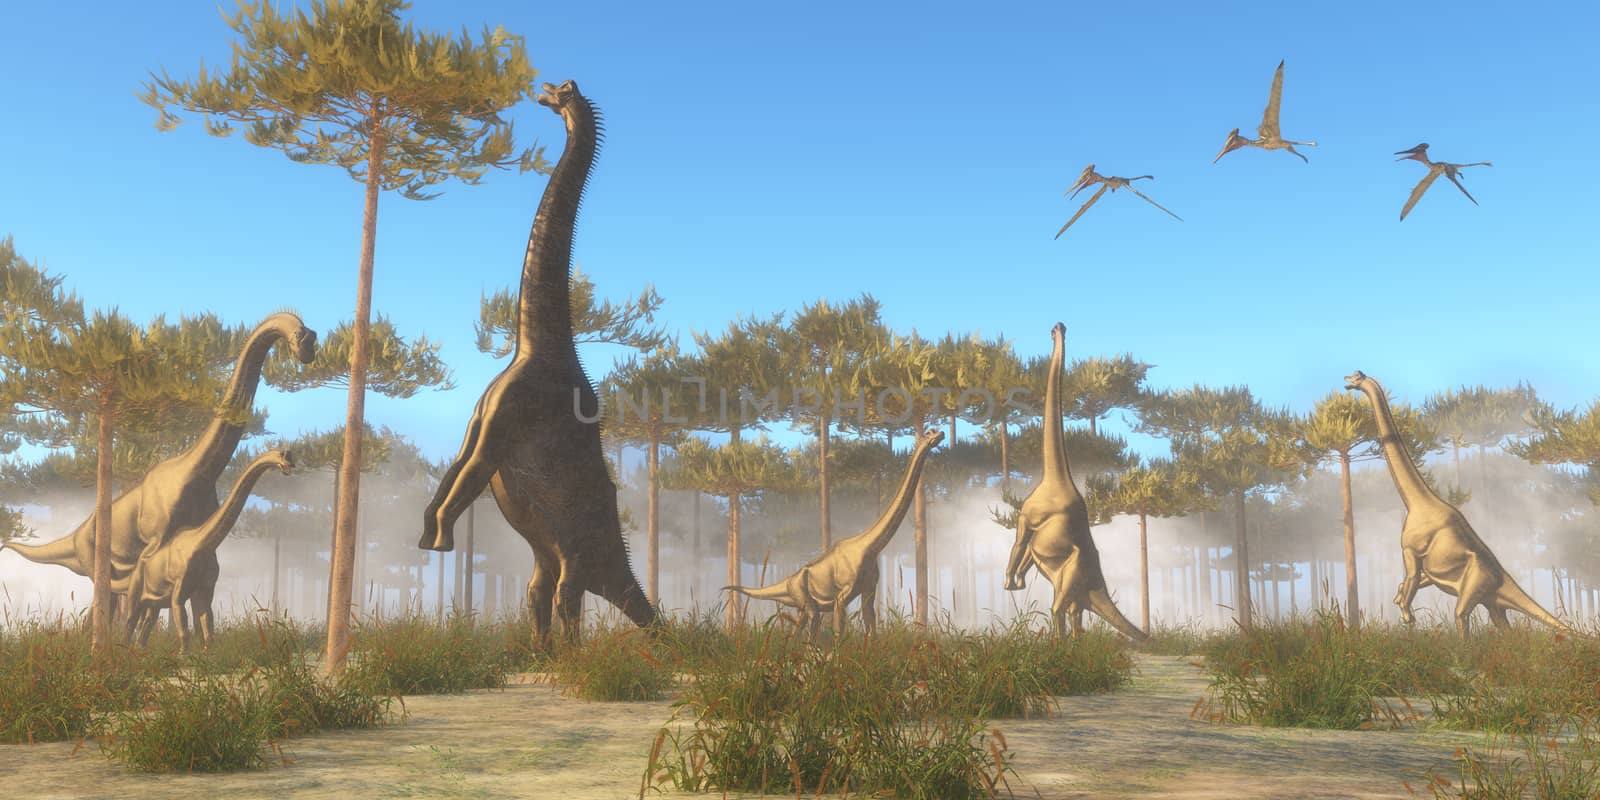 Brachiosaurus was a herbivorous sauropod dinosaur that lived in the Jurassic Age of North America. A Brachiosaurus herd browse on tree tops as a flock of Pterodactylus flying reptiles fly overhead.